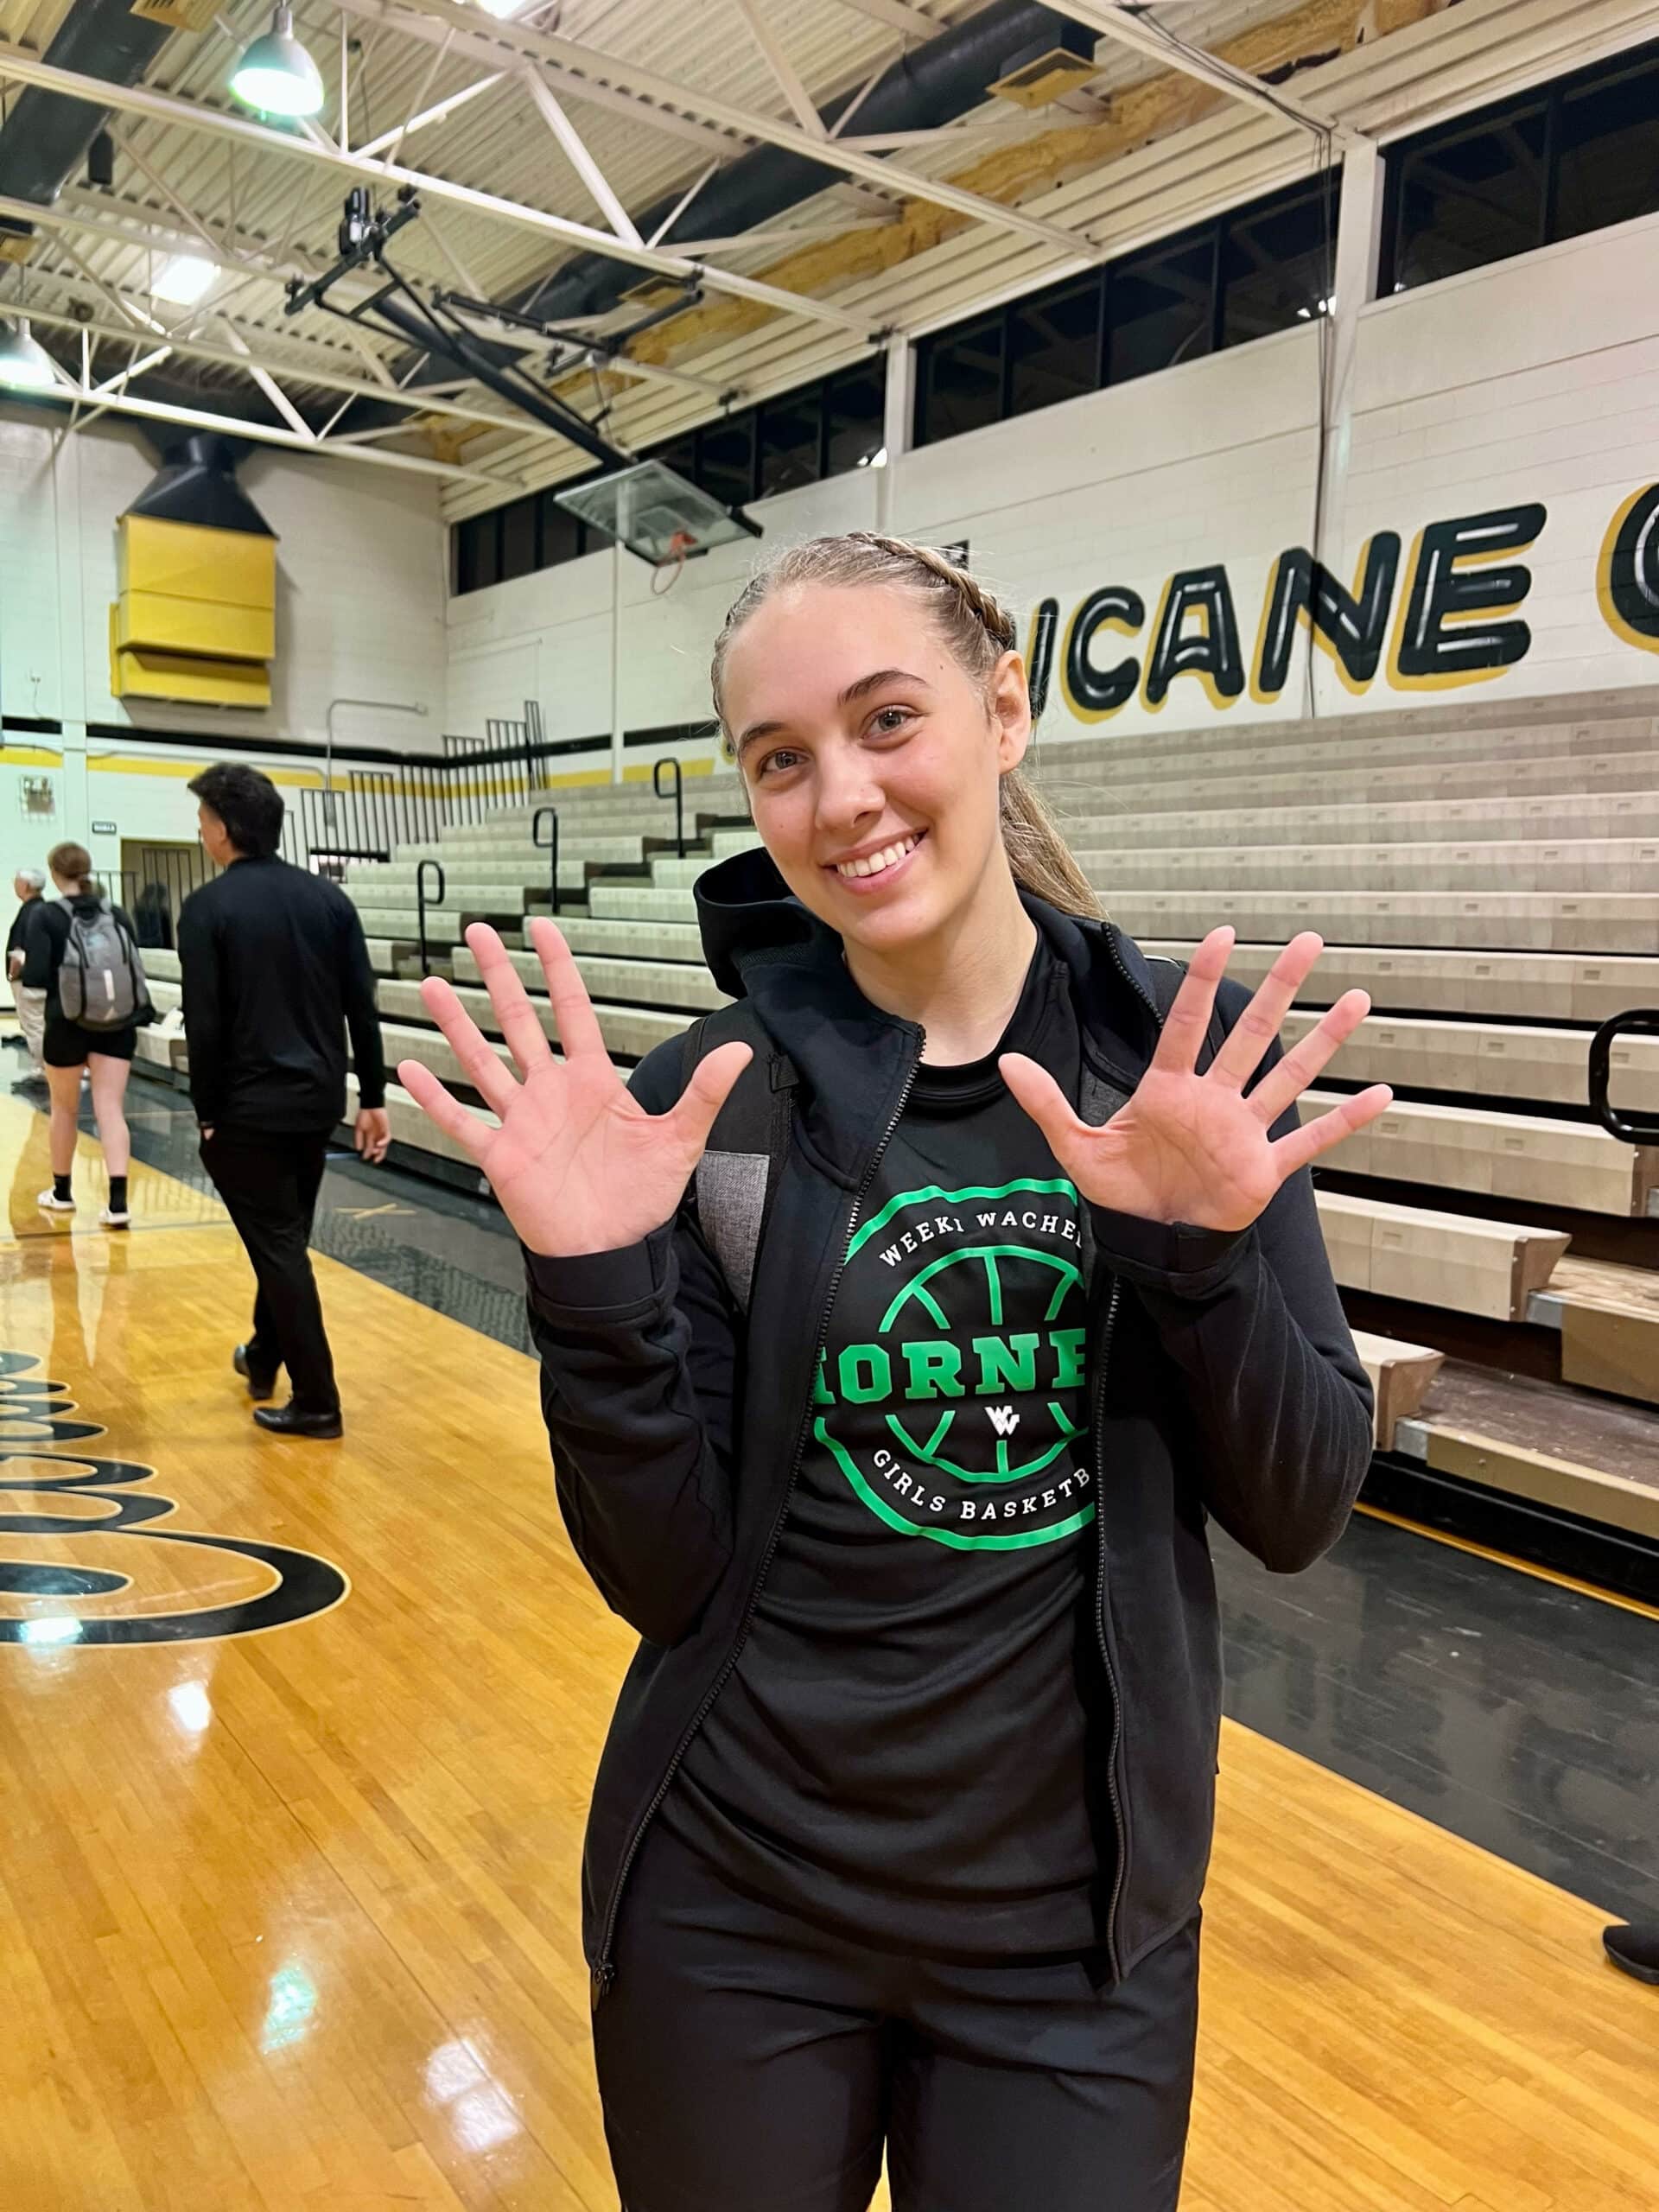 Junior Paige Atwater had a night to remember on December 14, 2022, as she broke the Weeki Wachee High School record for most 3-pointers made in a game with 10 in a win at Citrus High School. The record was previously held by Hannah Storie, who had made 7 in a game back in 2017.